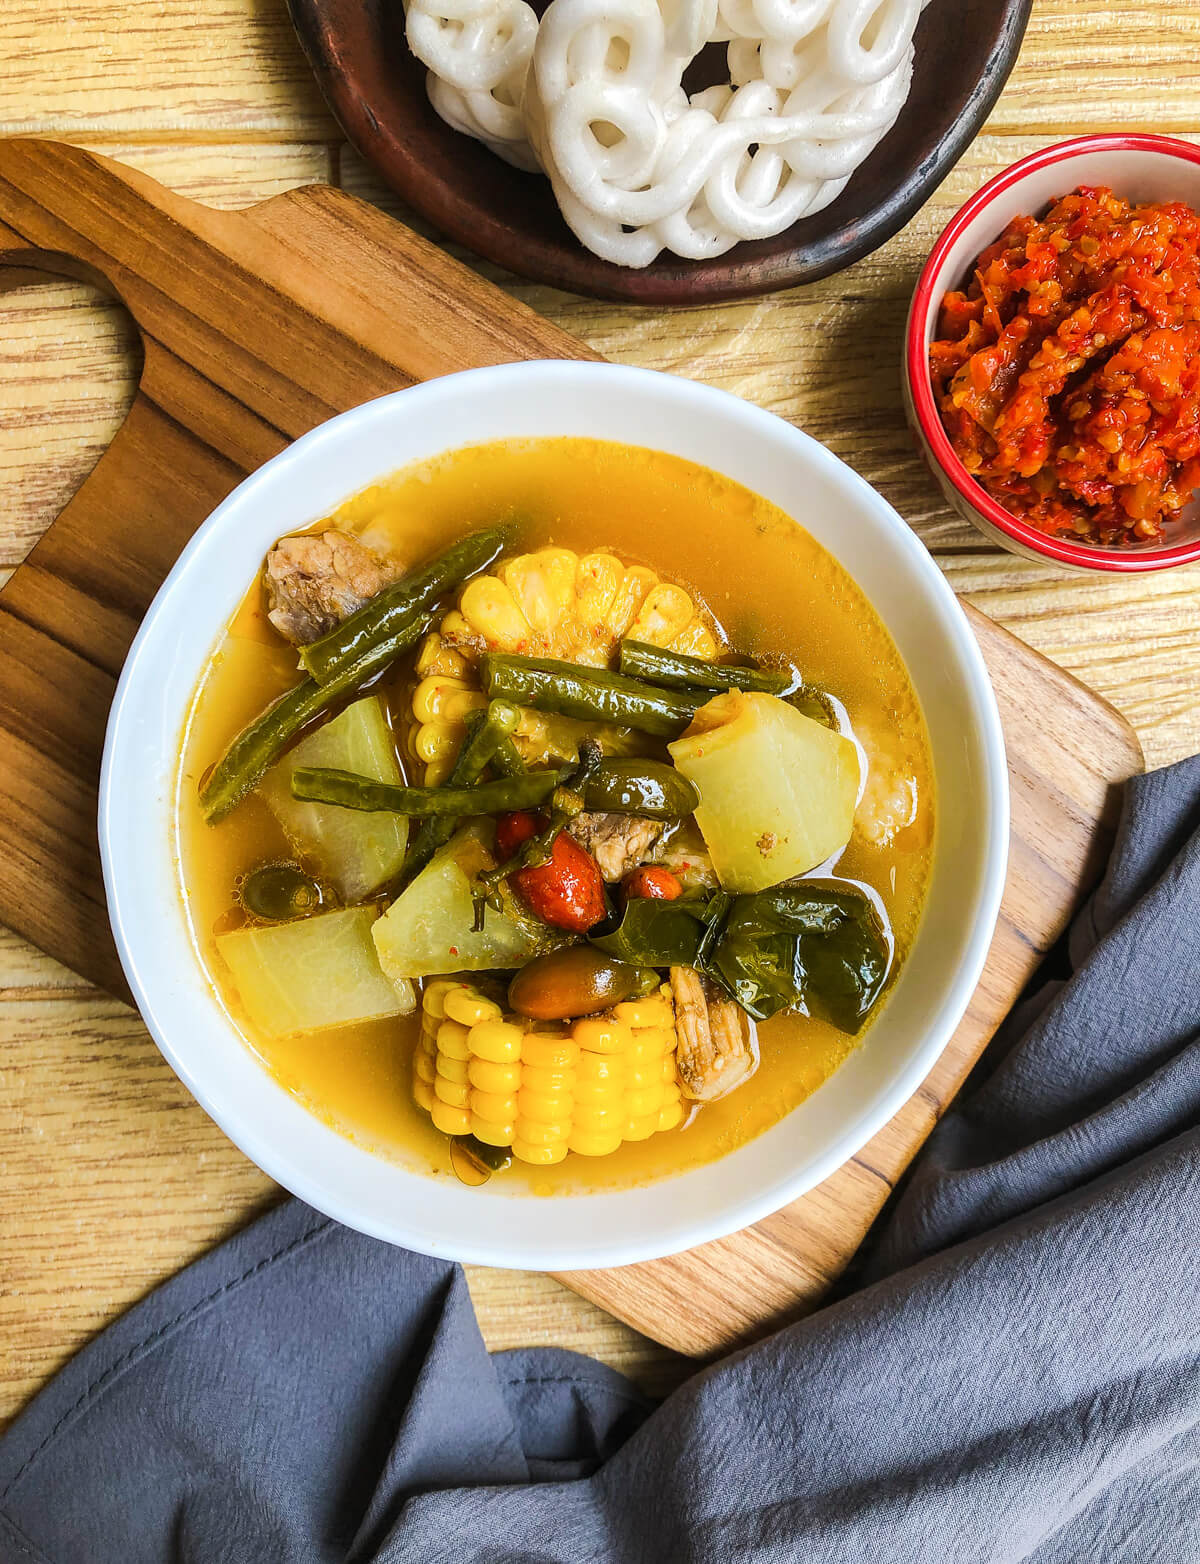  Sayur  Asem Sour Tamarind Soup with Vegetables and Beef 